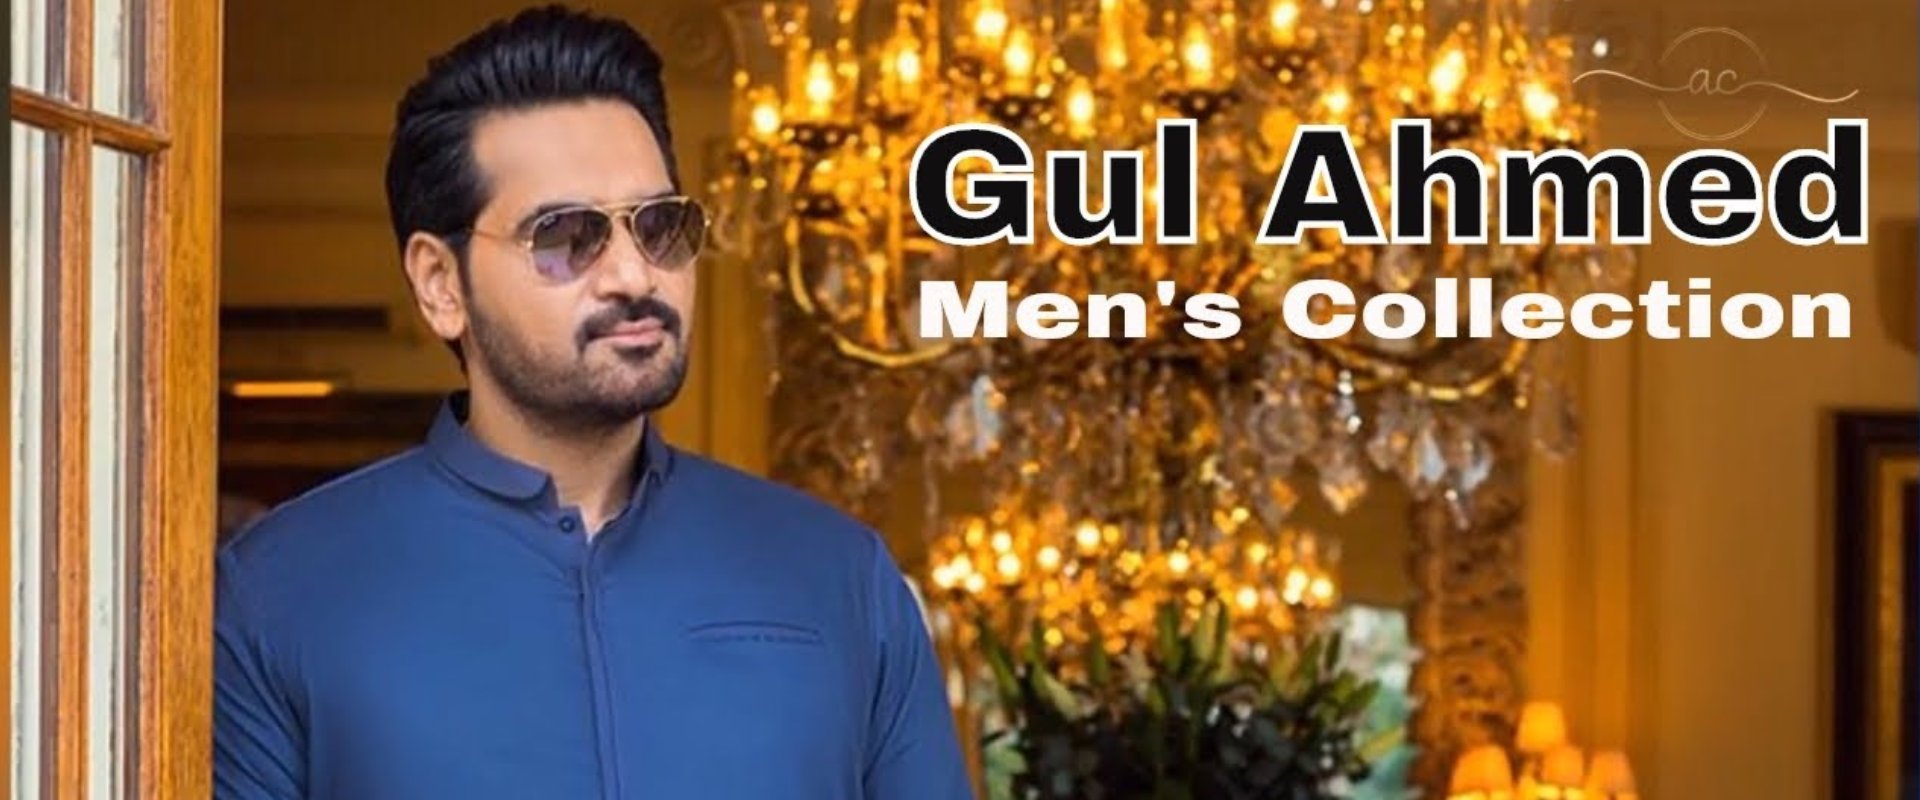 Gul Ahmed Unstitched Gents Clothes - Gul Ahmed Men Collection - Trusted Brand by Askani Group of Companies